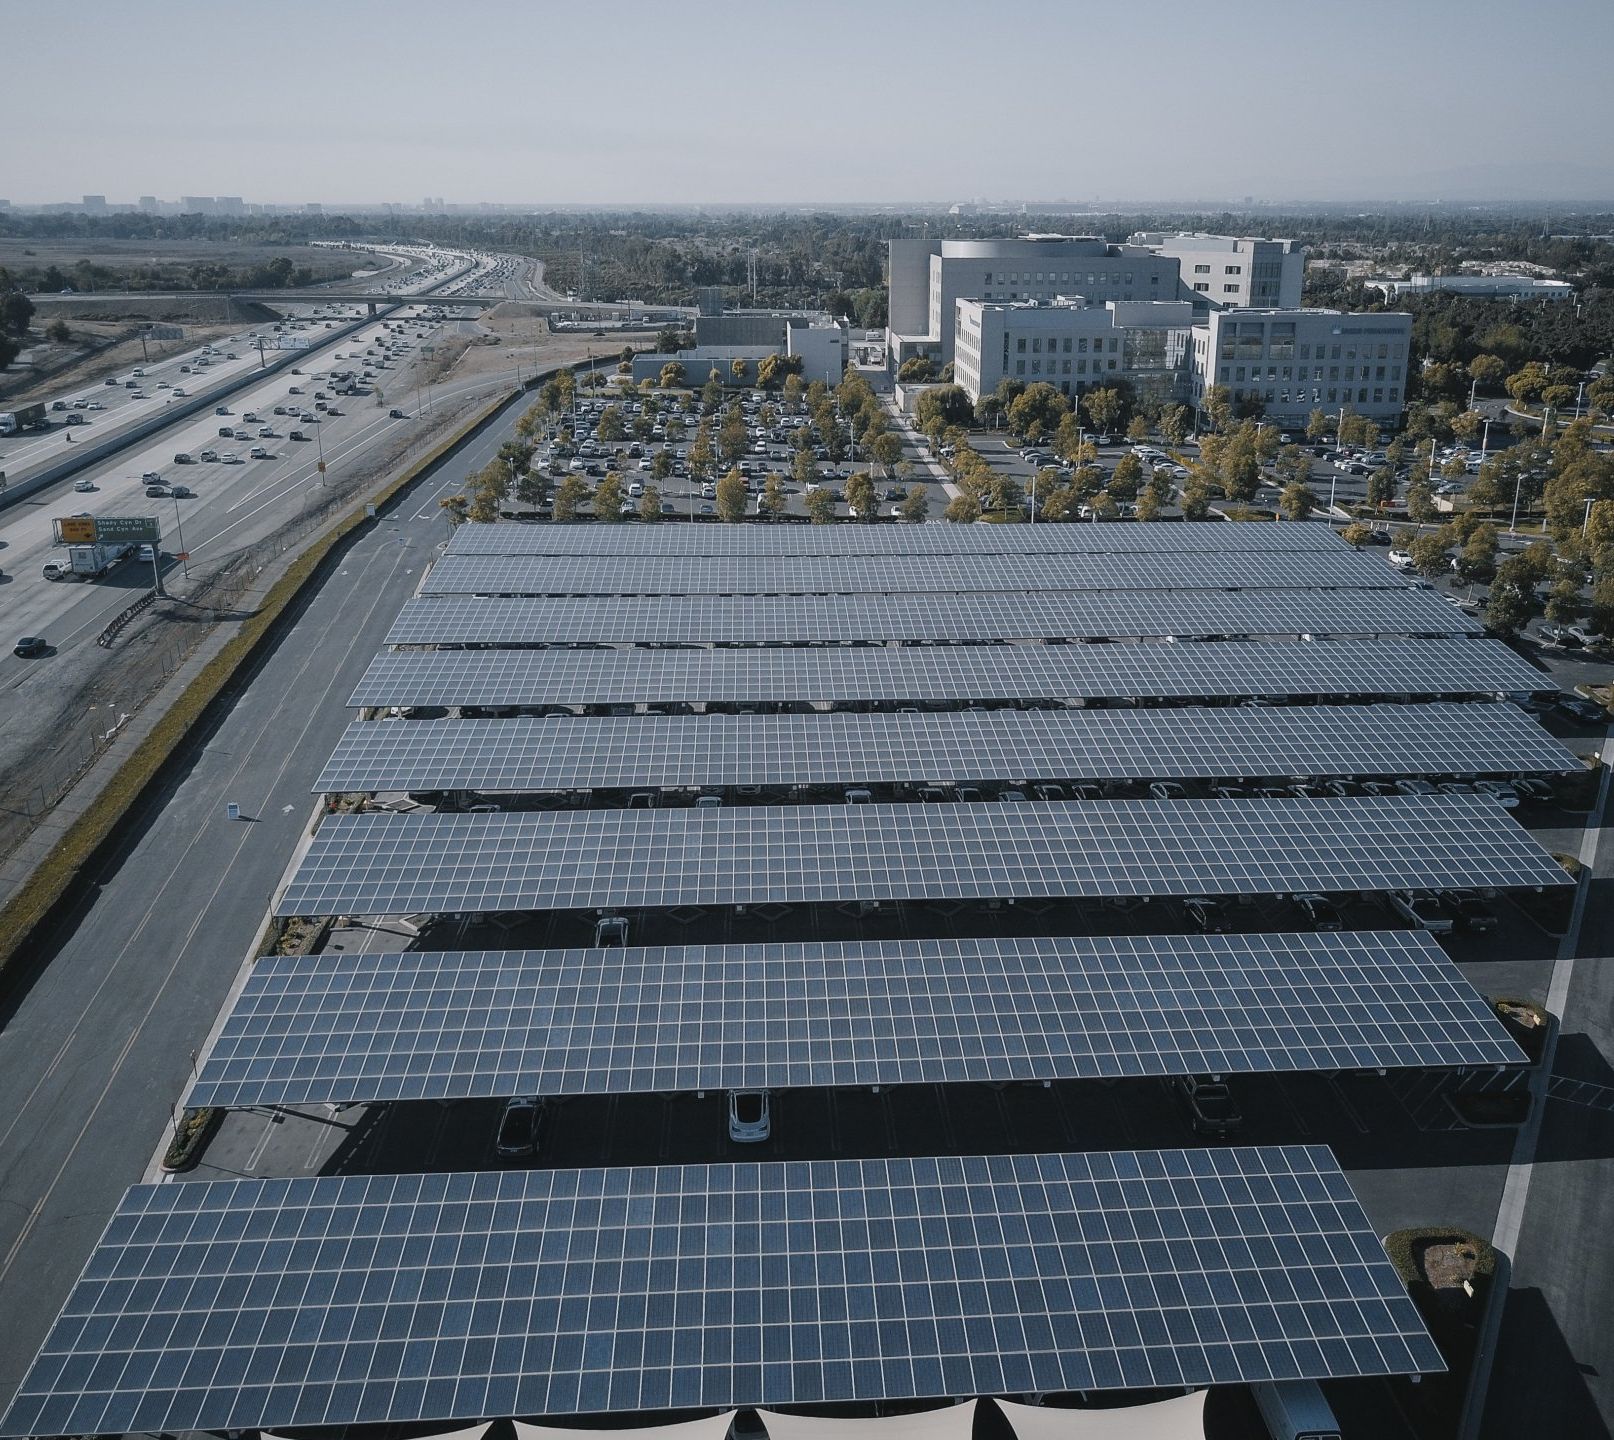 An aerial view of a parking lot with lots of solar panels that also act as shading for the lot